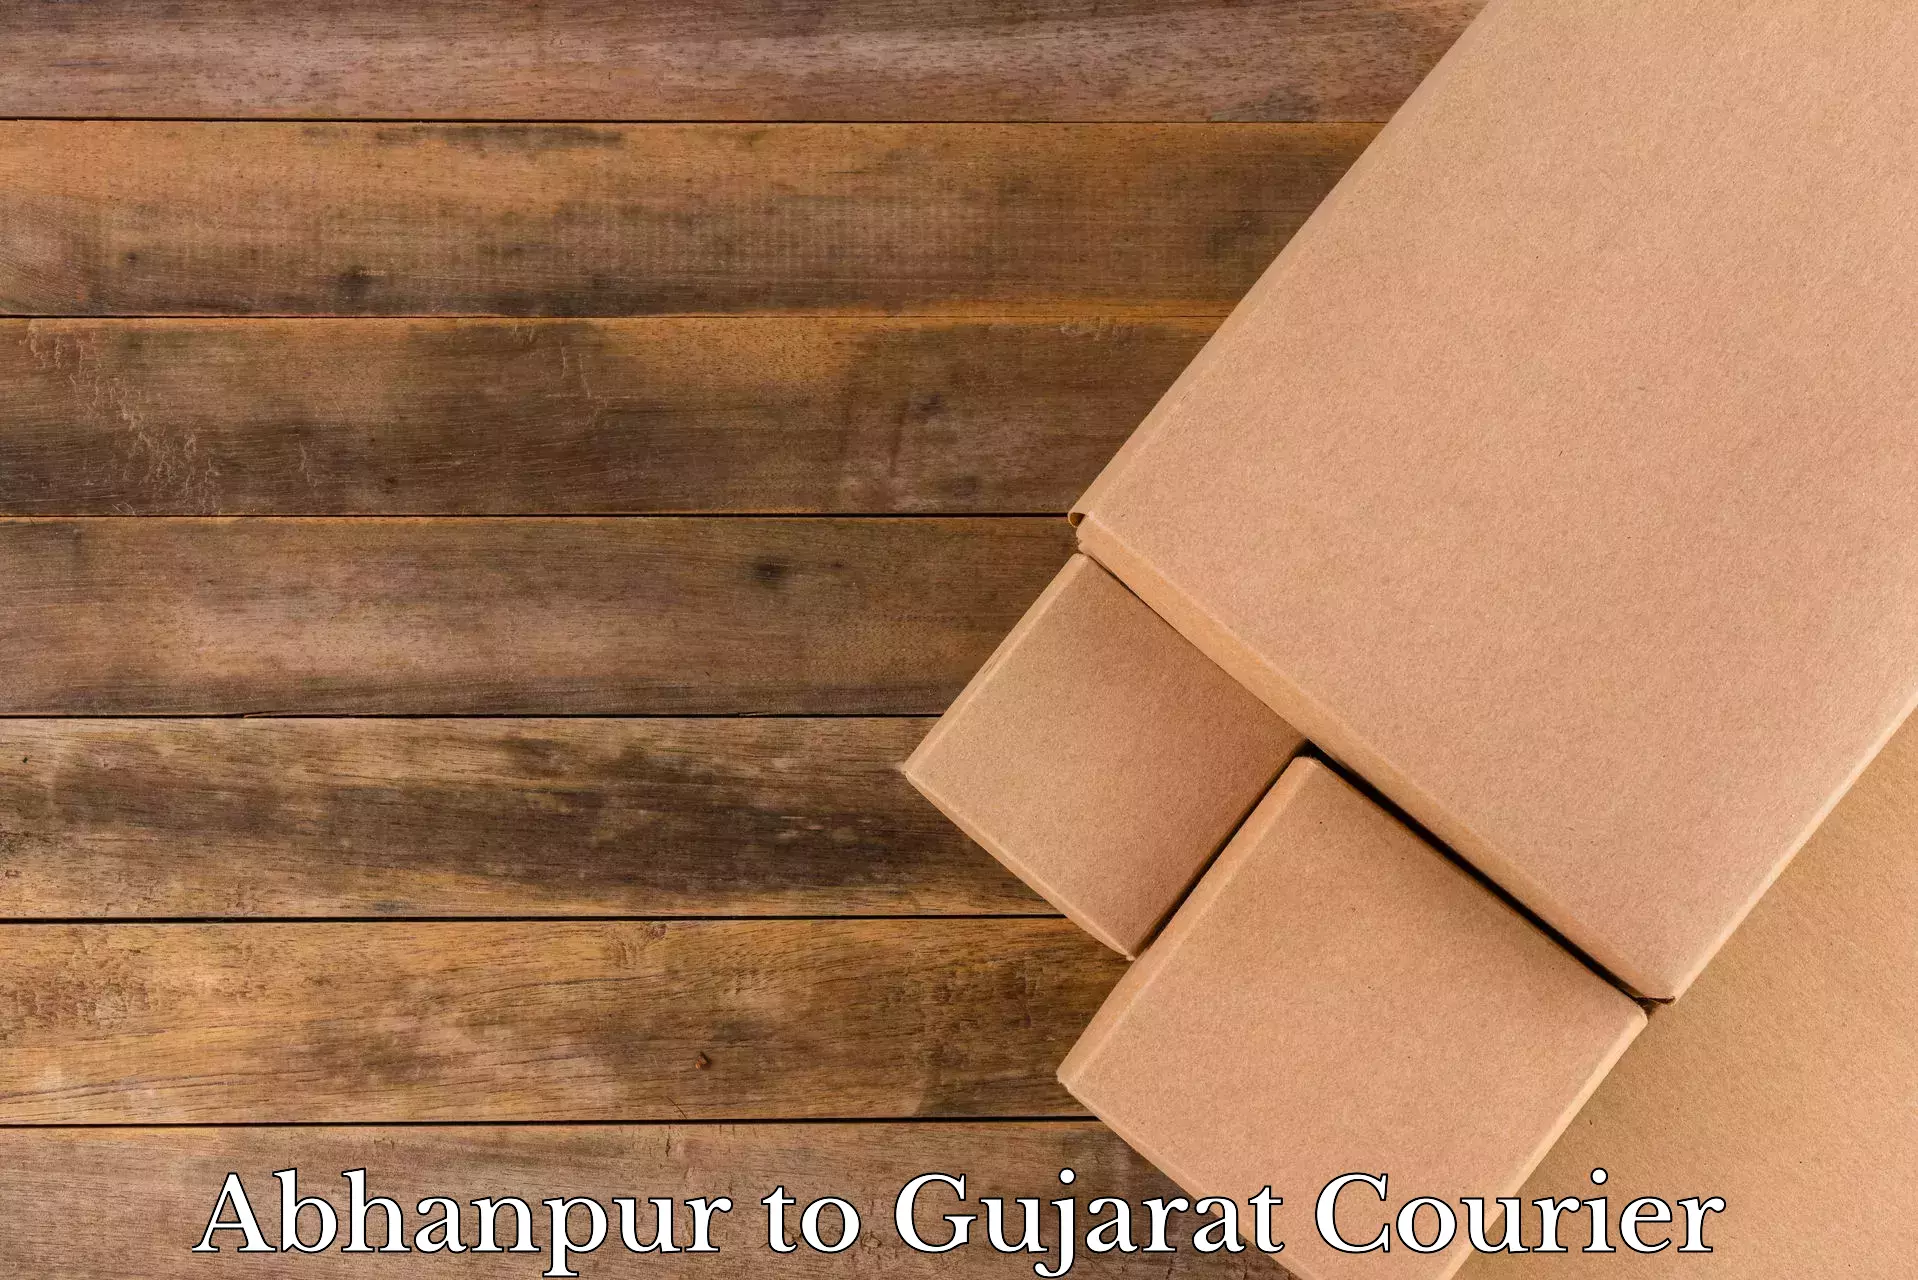 Budget-friendly movers in Abhanpur to Chotila